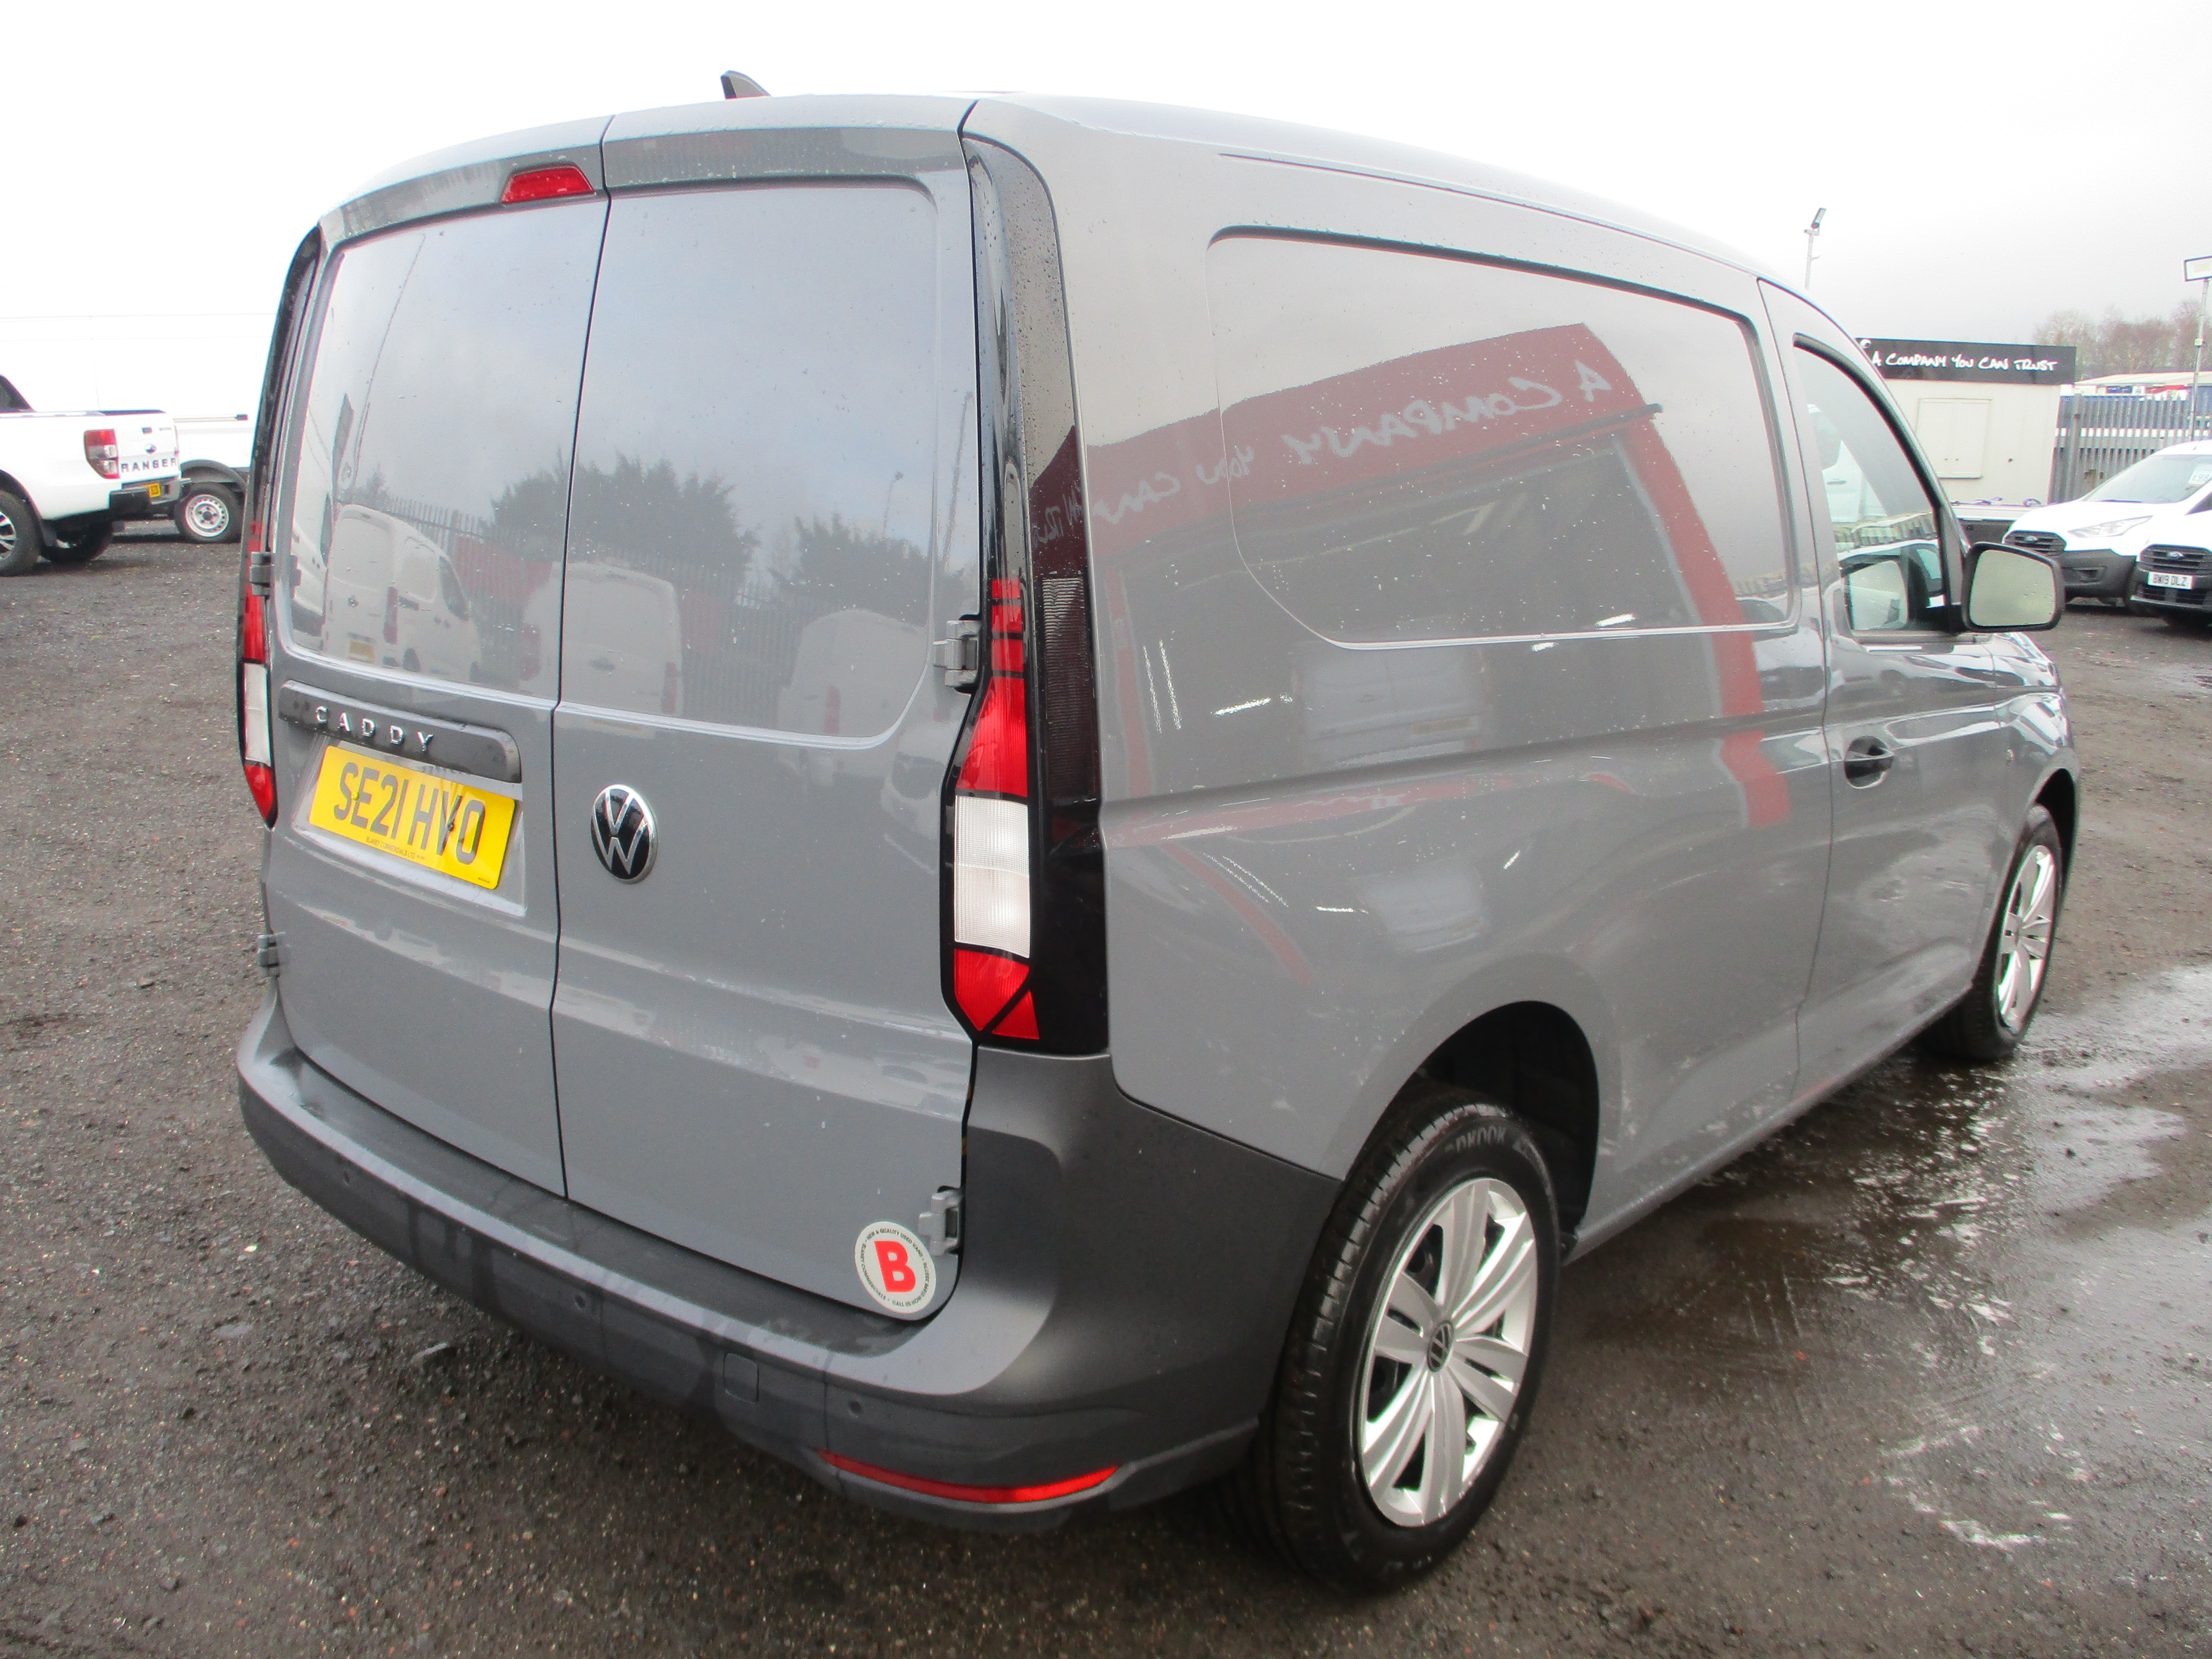 Volkswagen Caddy C20 2.0TDi 102PS Commerce Panel Van with Business Pack including Air Con (VW COLOUR PURE GREY LOVELY IN THE NEW CADDY)